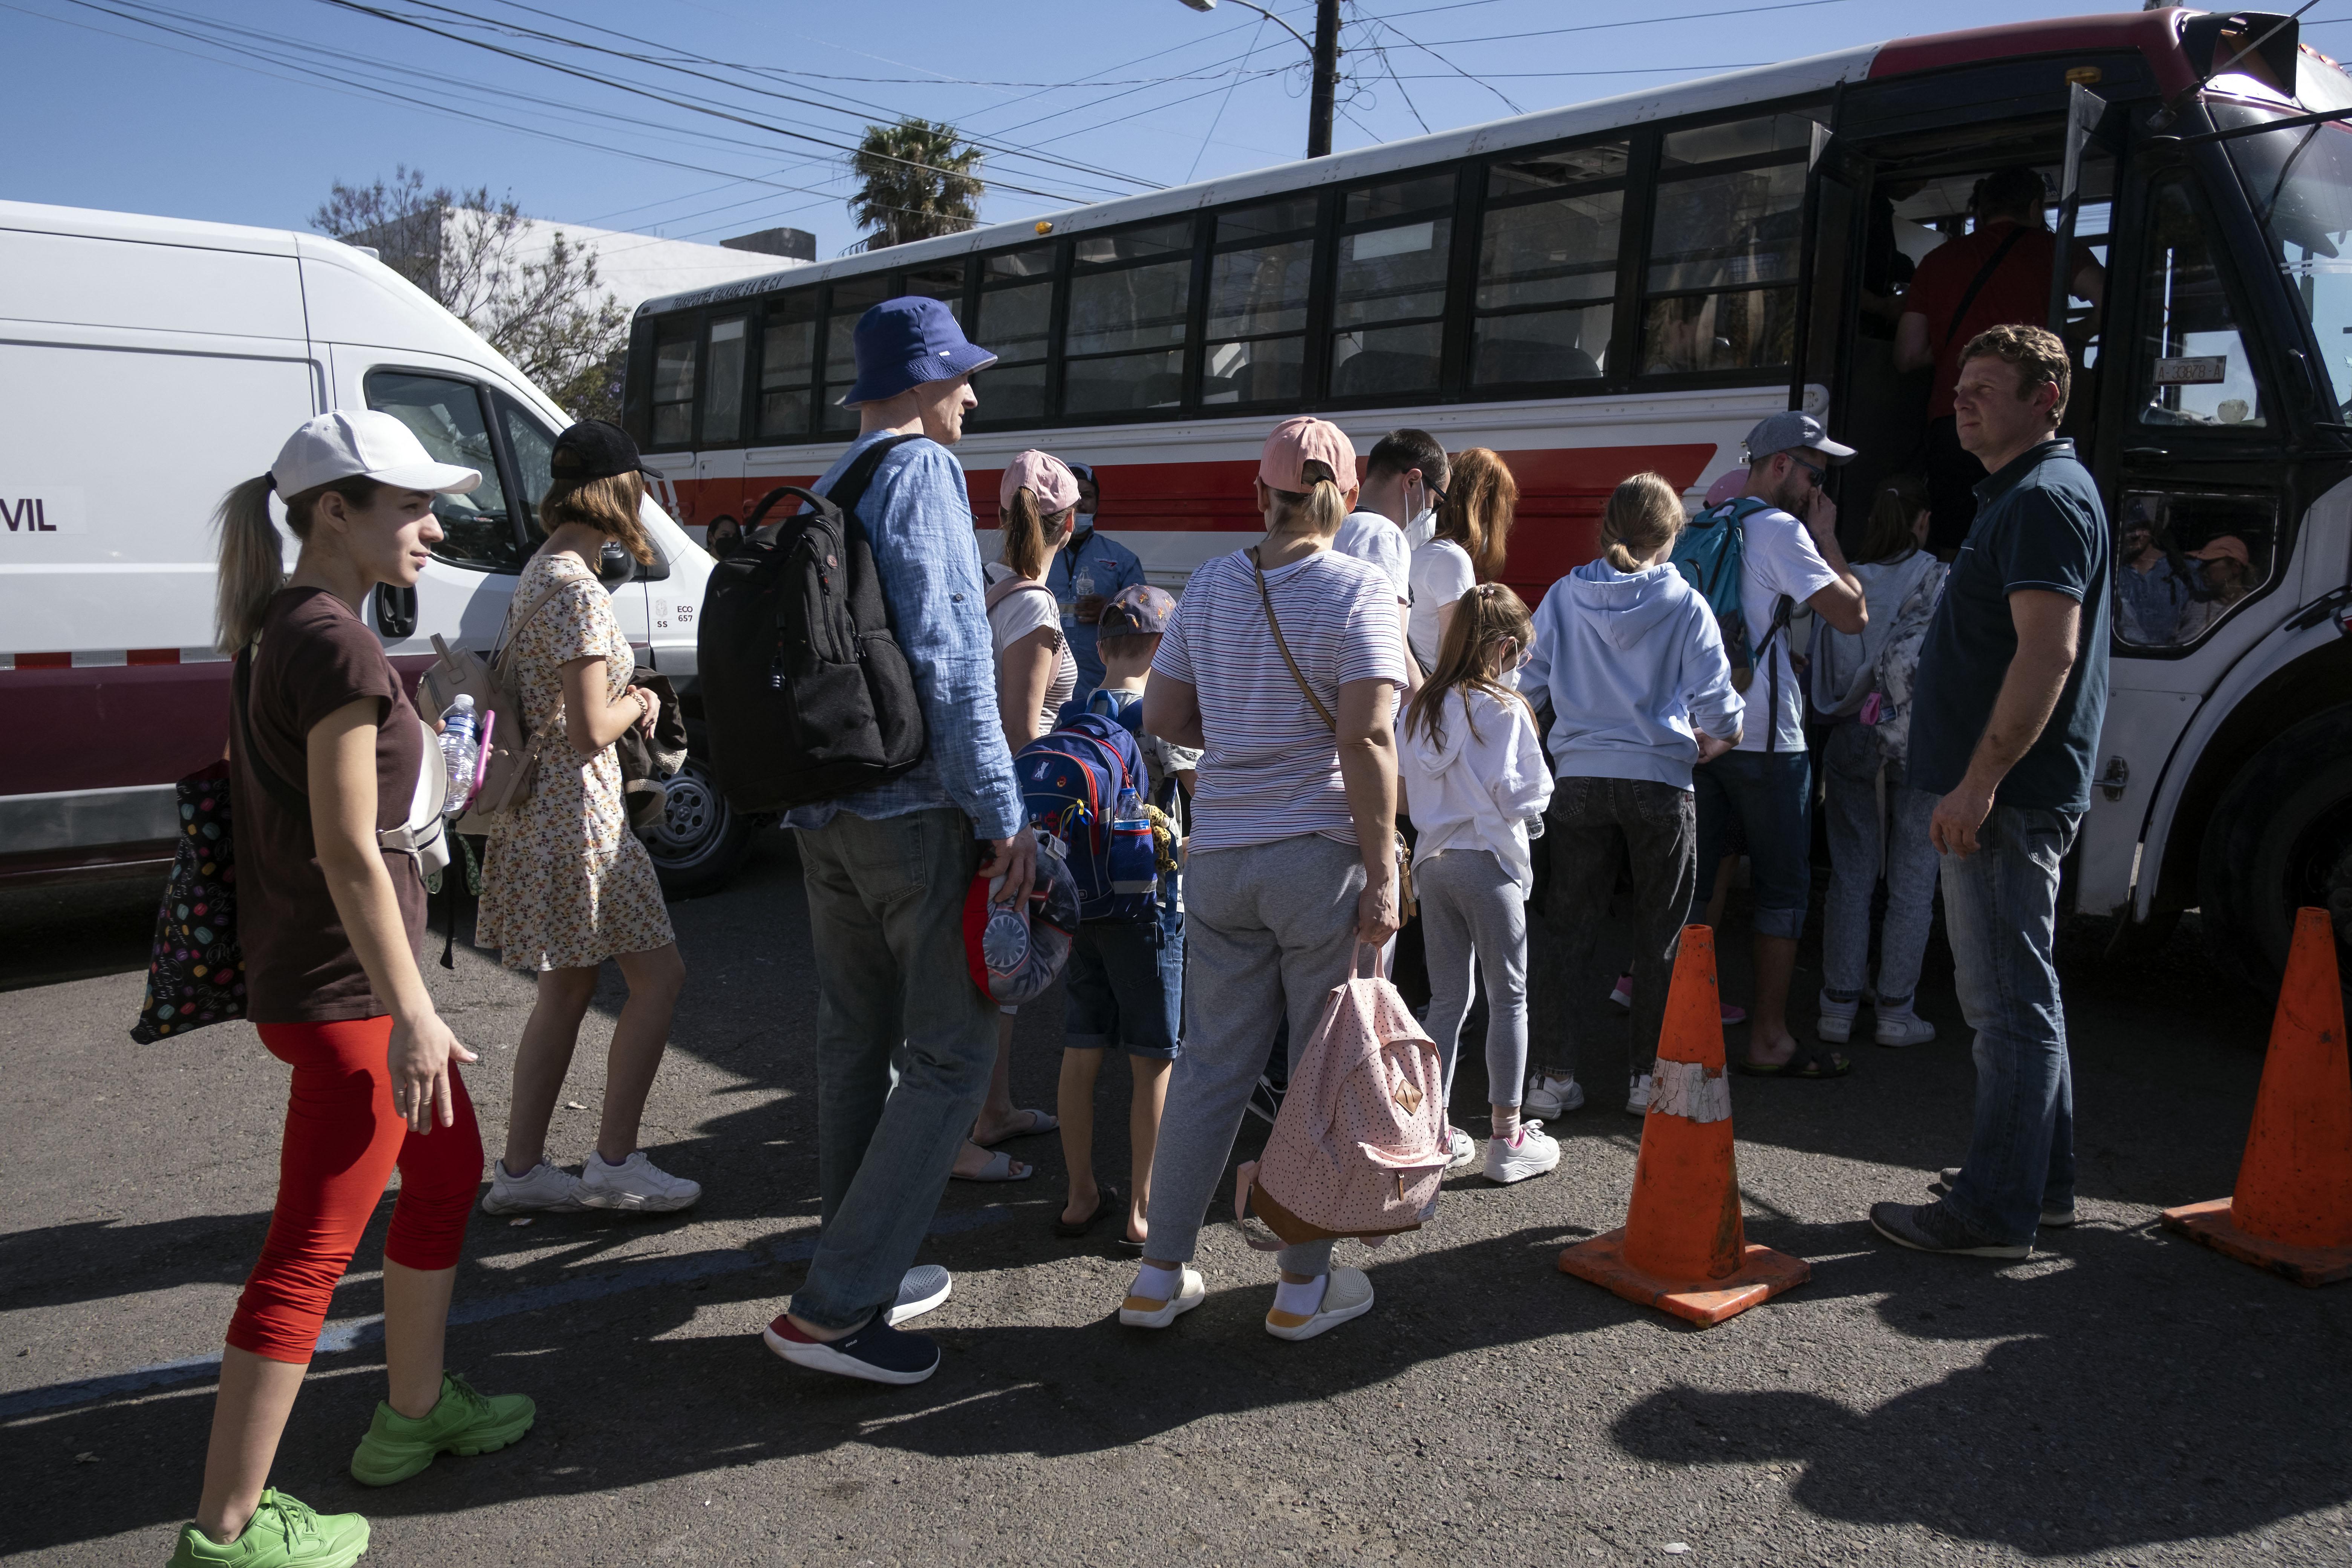 Ukrainians seeking for asylum in the United States board a bus that will go to the border crossing, at the Benito Juarez sports complex in Tijuana, located in the Mexican state of Baja California state, on April 8. 